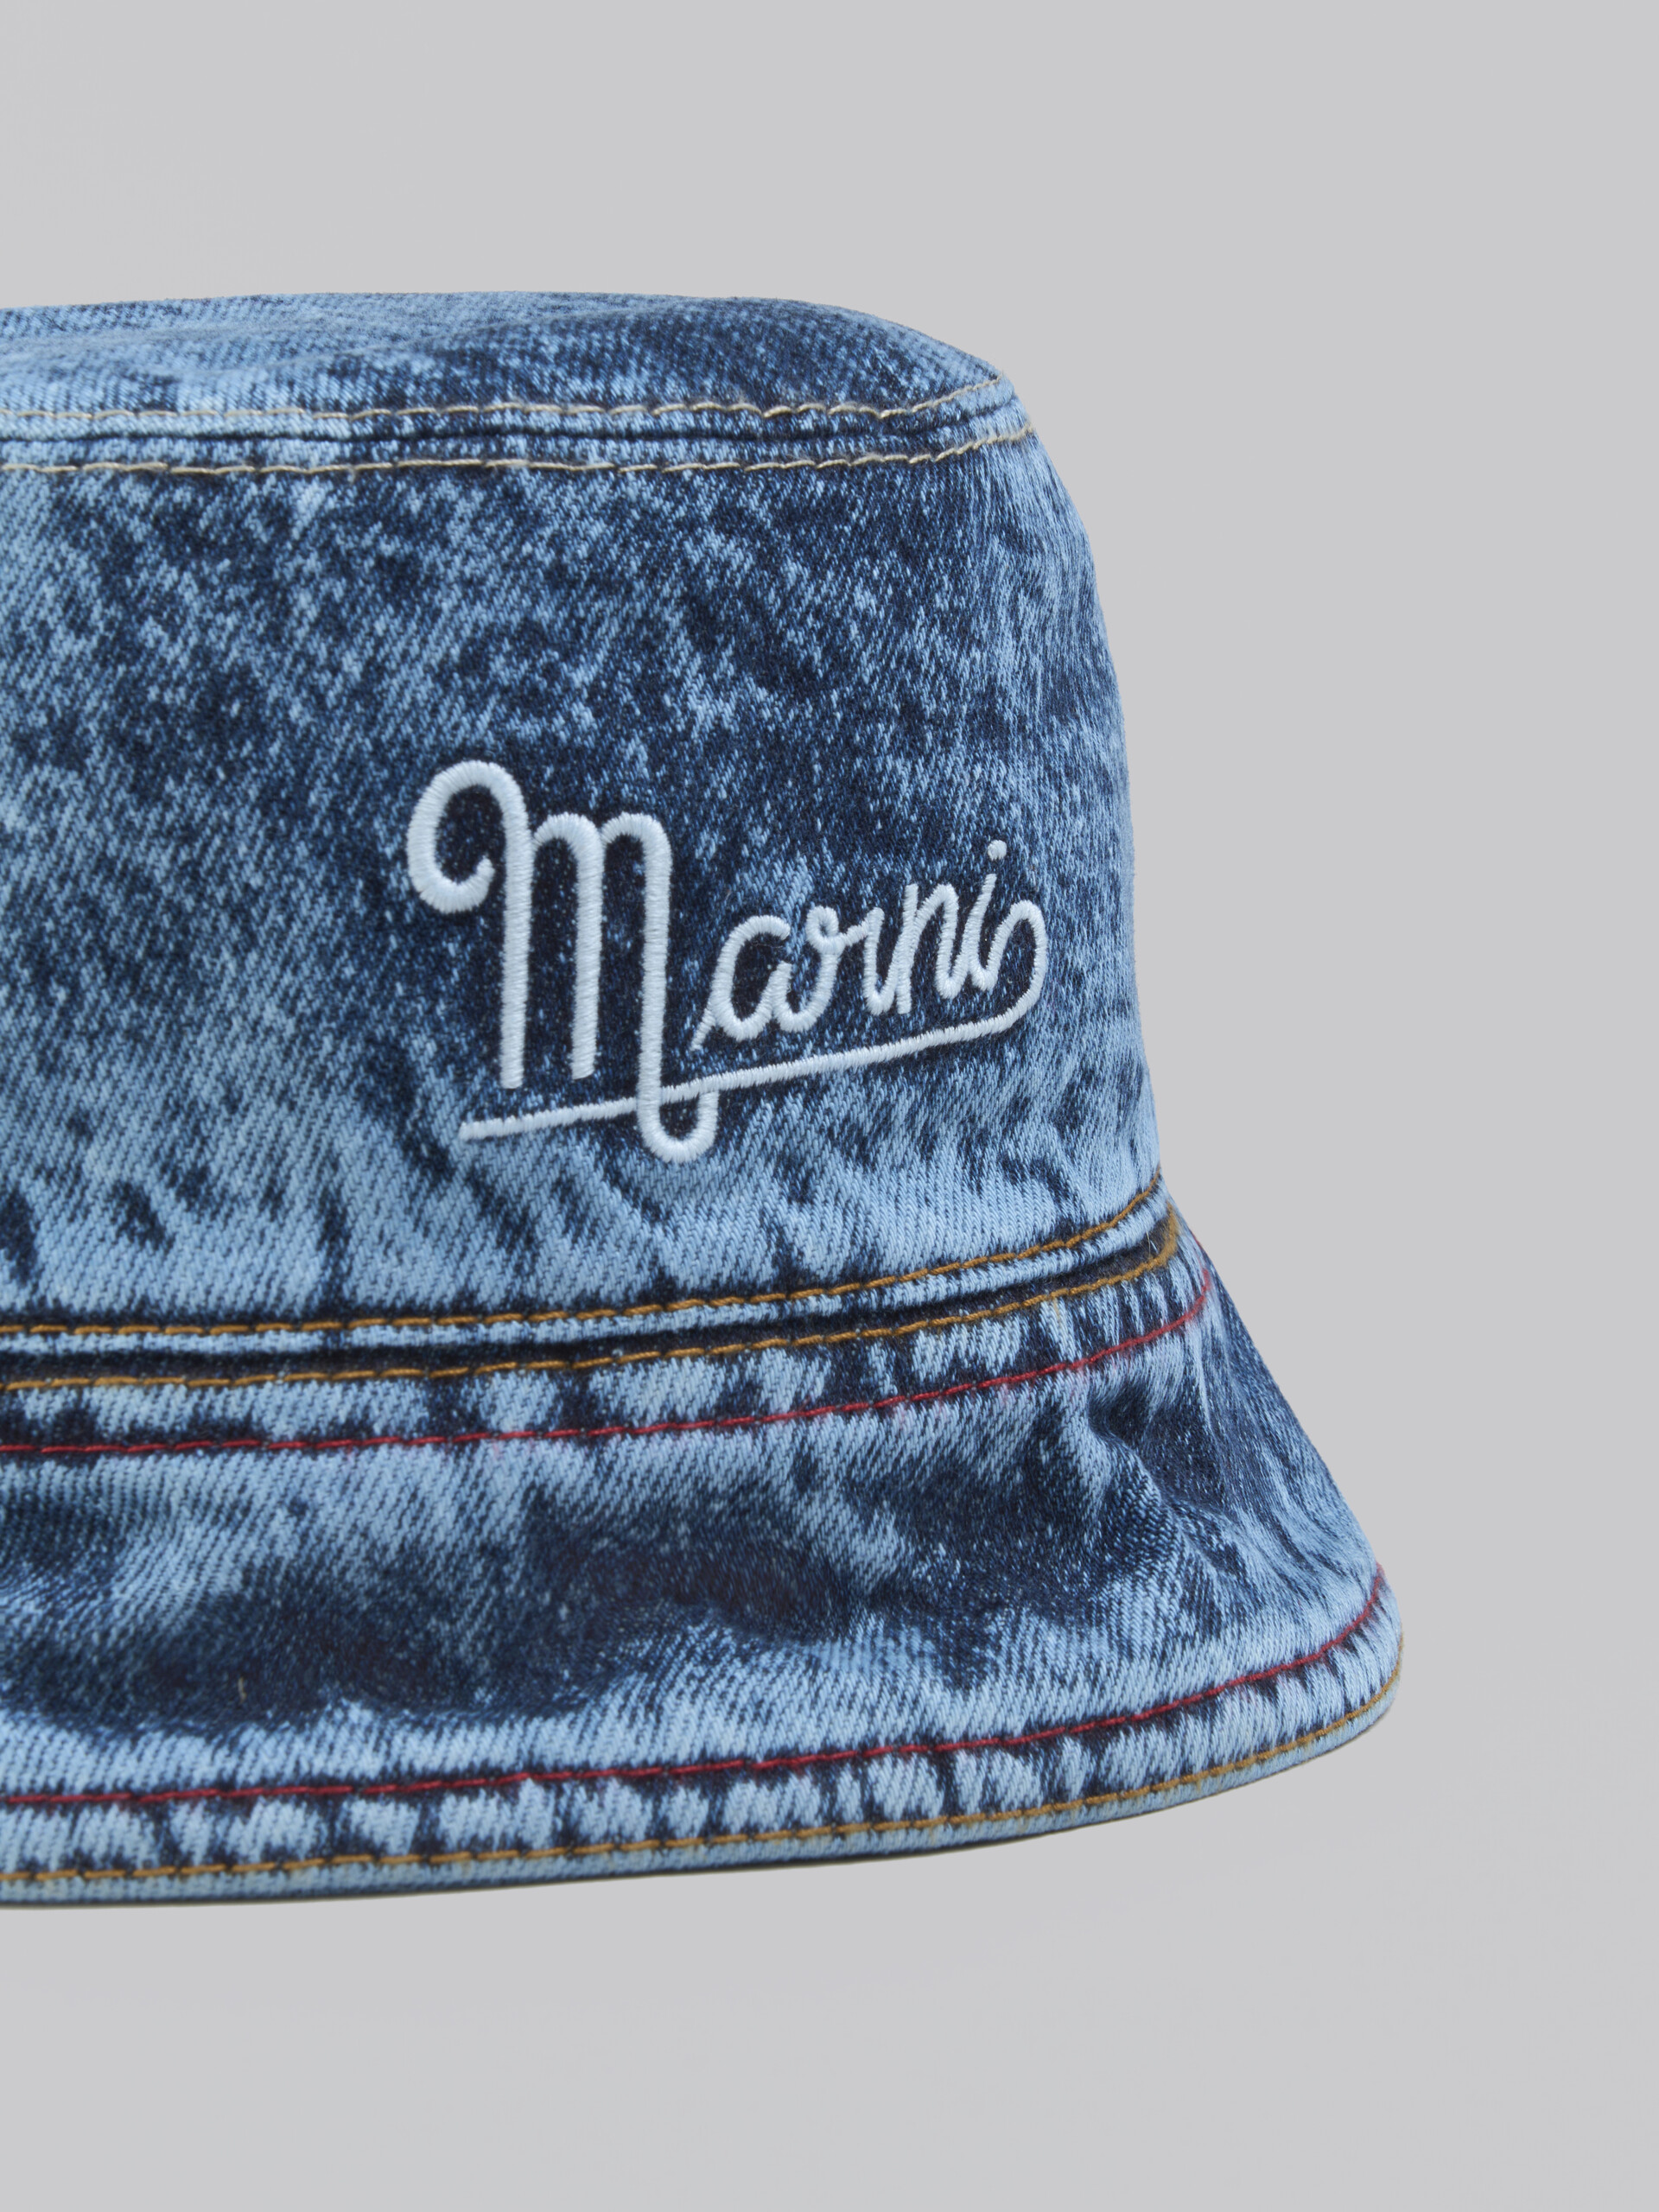 Blue denim bucket hat with marble-dyed finish